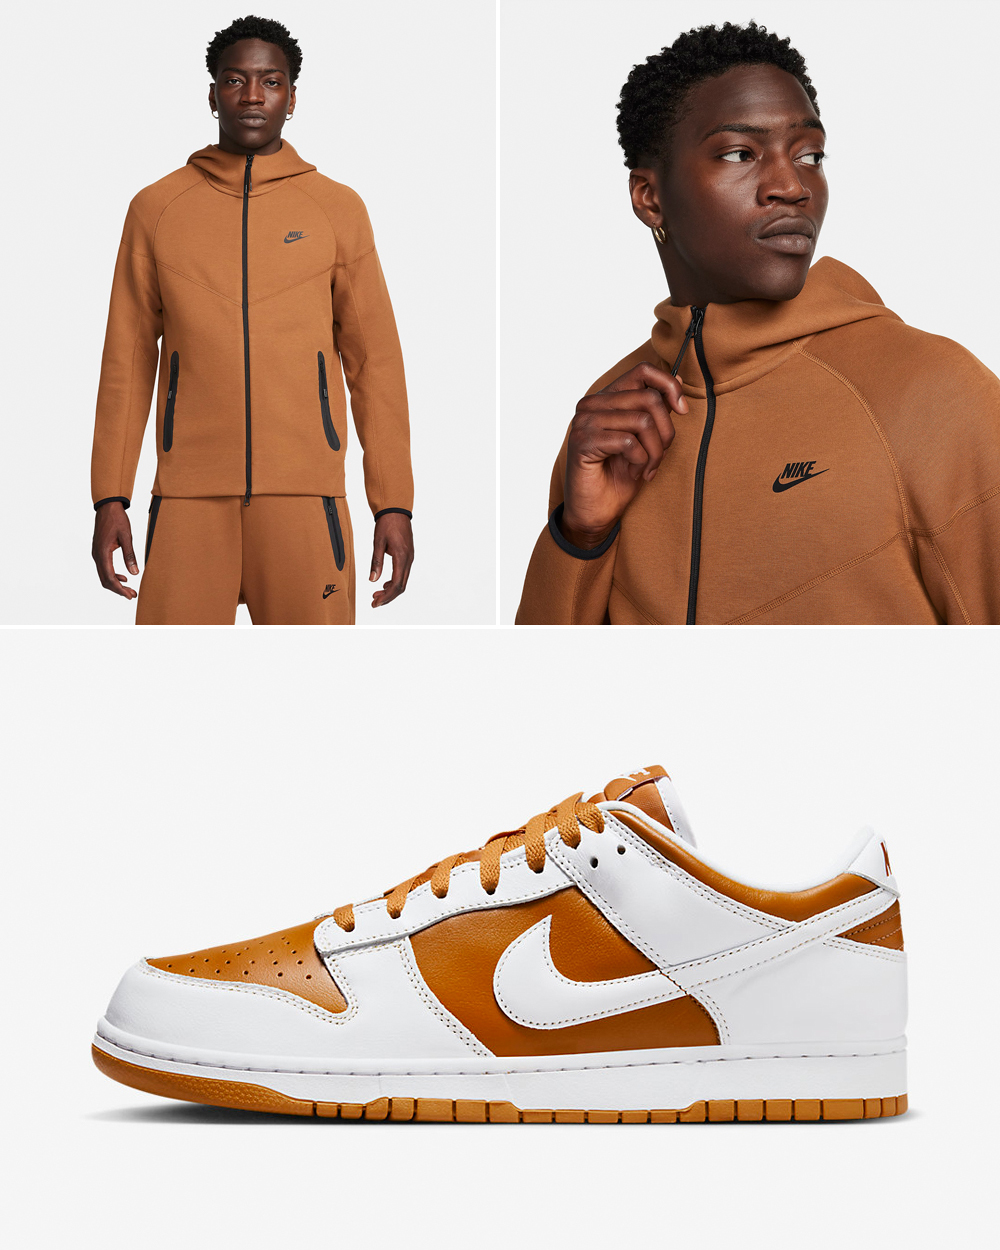 Nike-Dunk-Low-Reverse-Curry-Zip-Hoodie-Outfit